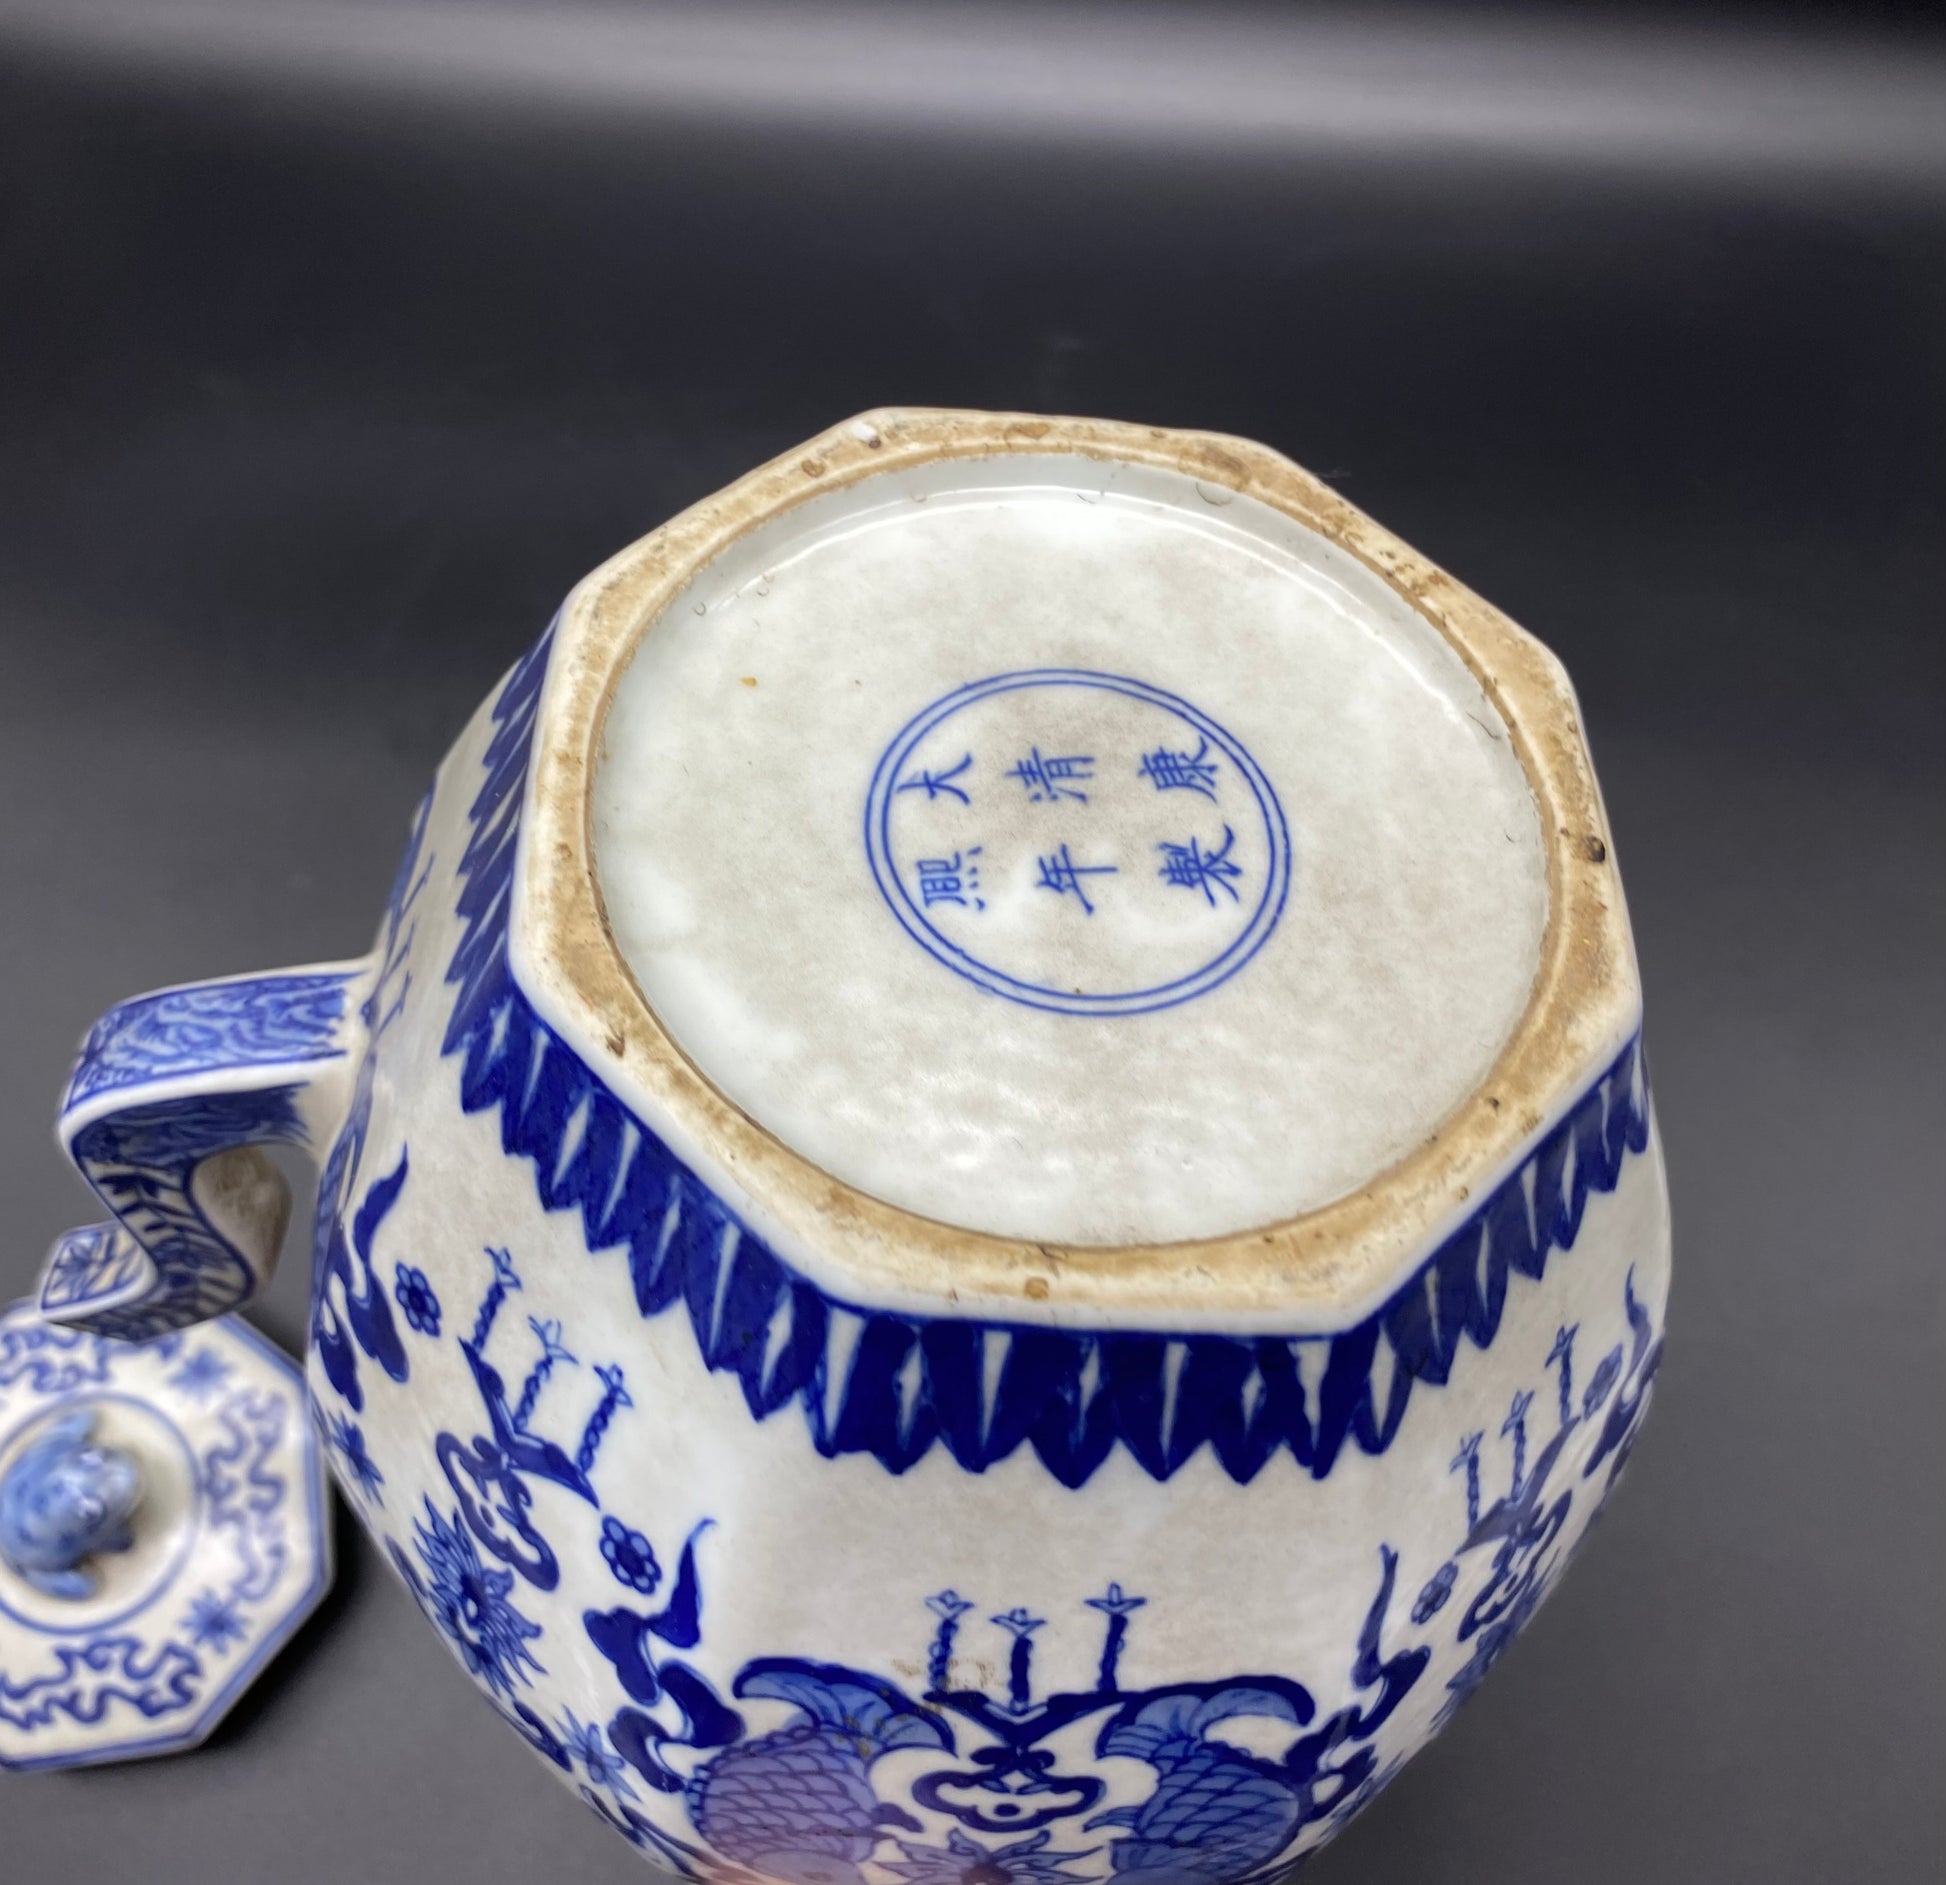 Antique Chinese hand painted blue and white porcelain covered teapot decorated with Fish scenes and frog lid. Circa Qing Dynasty period, 18th/19th century. Very good condition; No chips, cracks or repairs. Normal kiln spotting that one should expect from Antique Chinese porcelain.